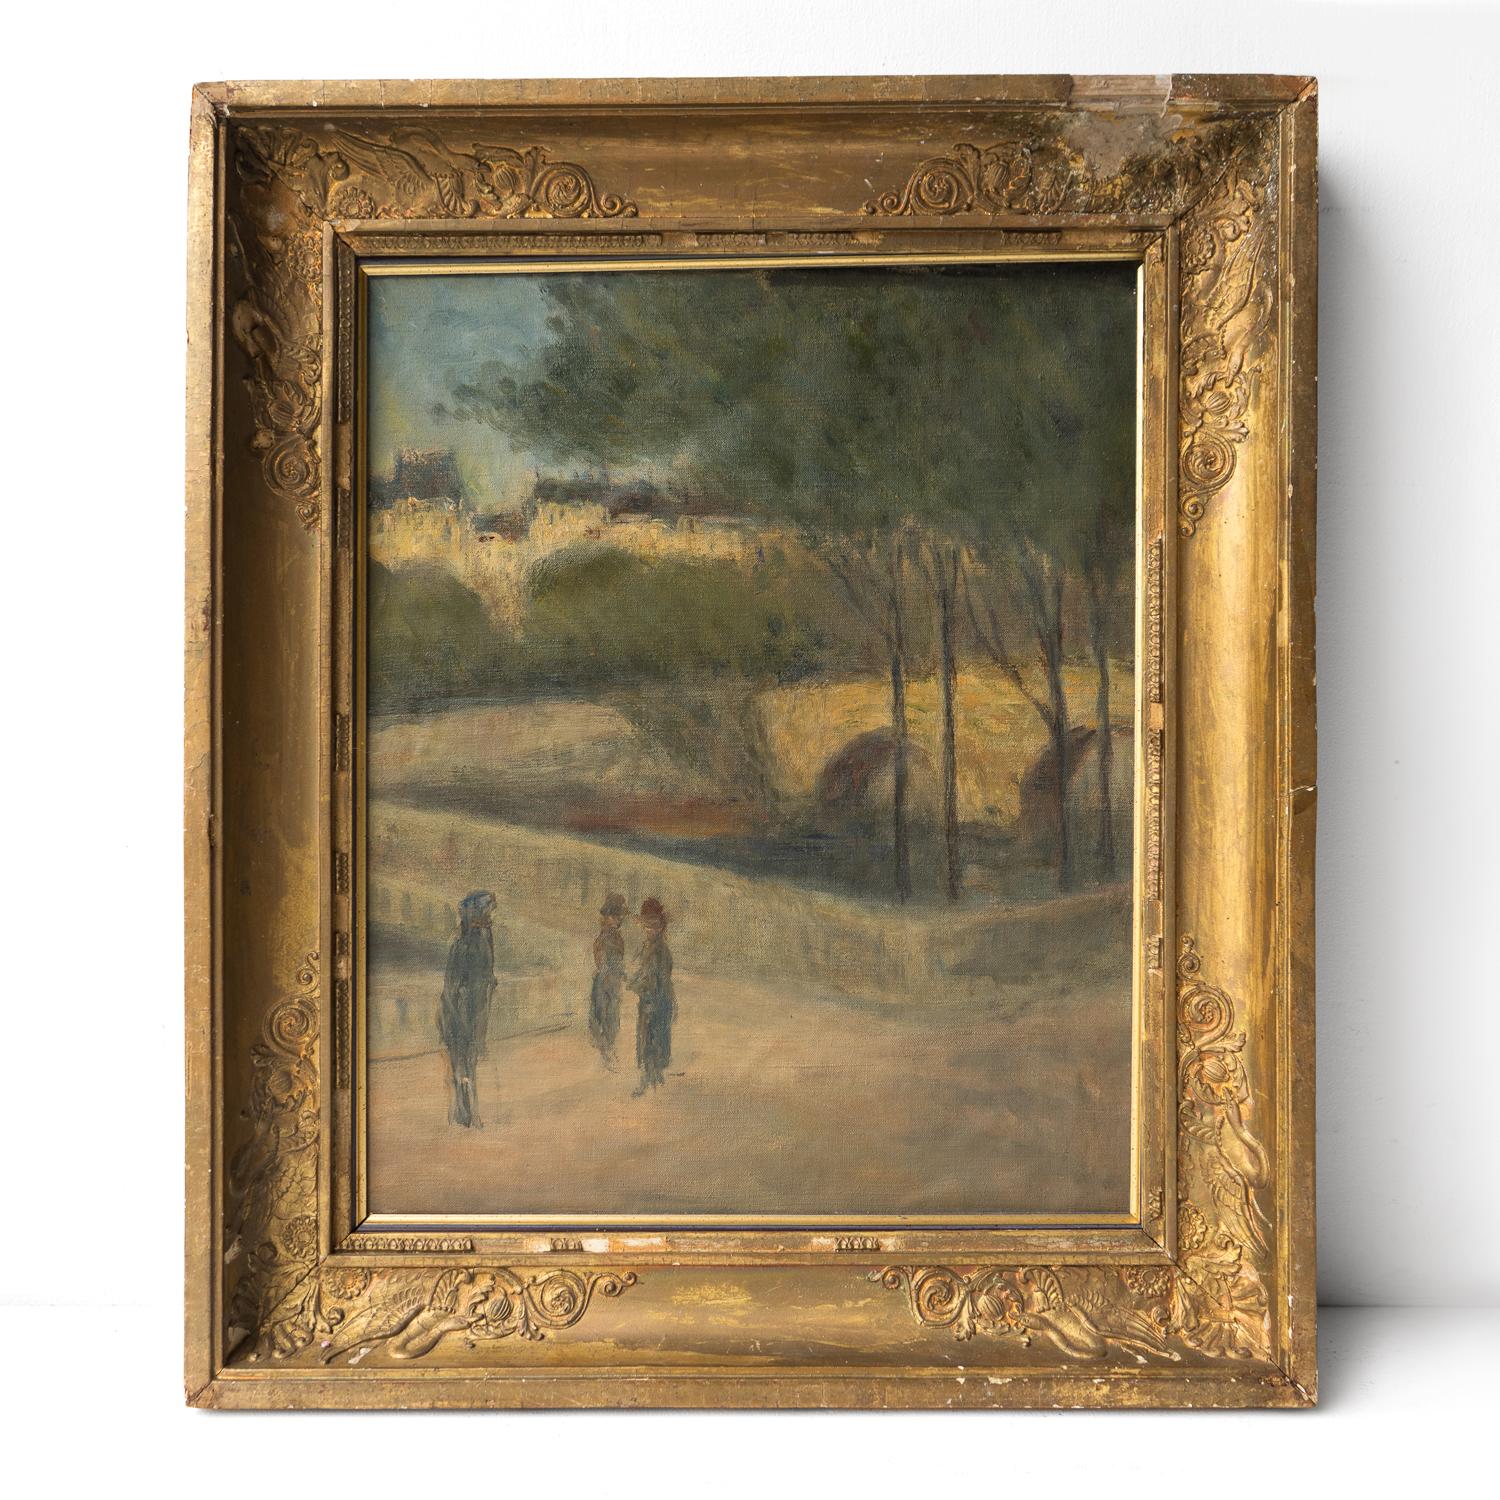 ANTIQUE ORIGINAL OIL ON CANVAS PAINTING 
Depicting figures in the foreground surrounded by trees standing in front of a bridge leading to a typically French town in the background.

Painted confidently in a romantic impressionist style.

The